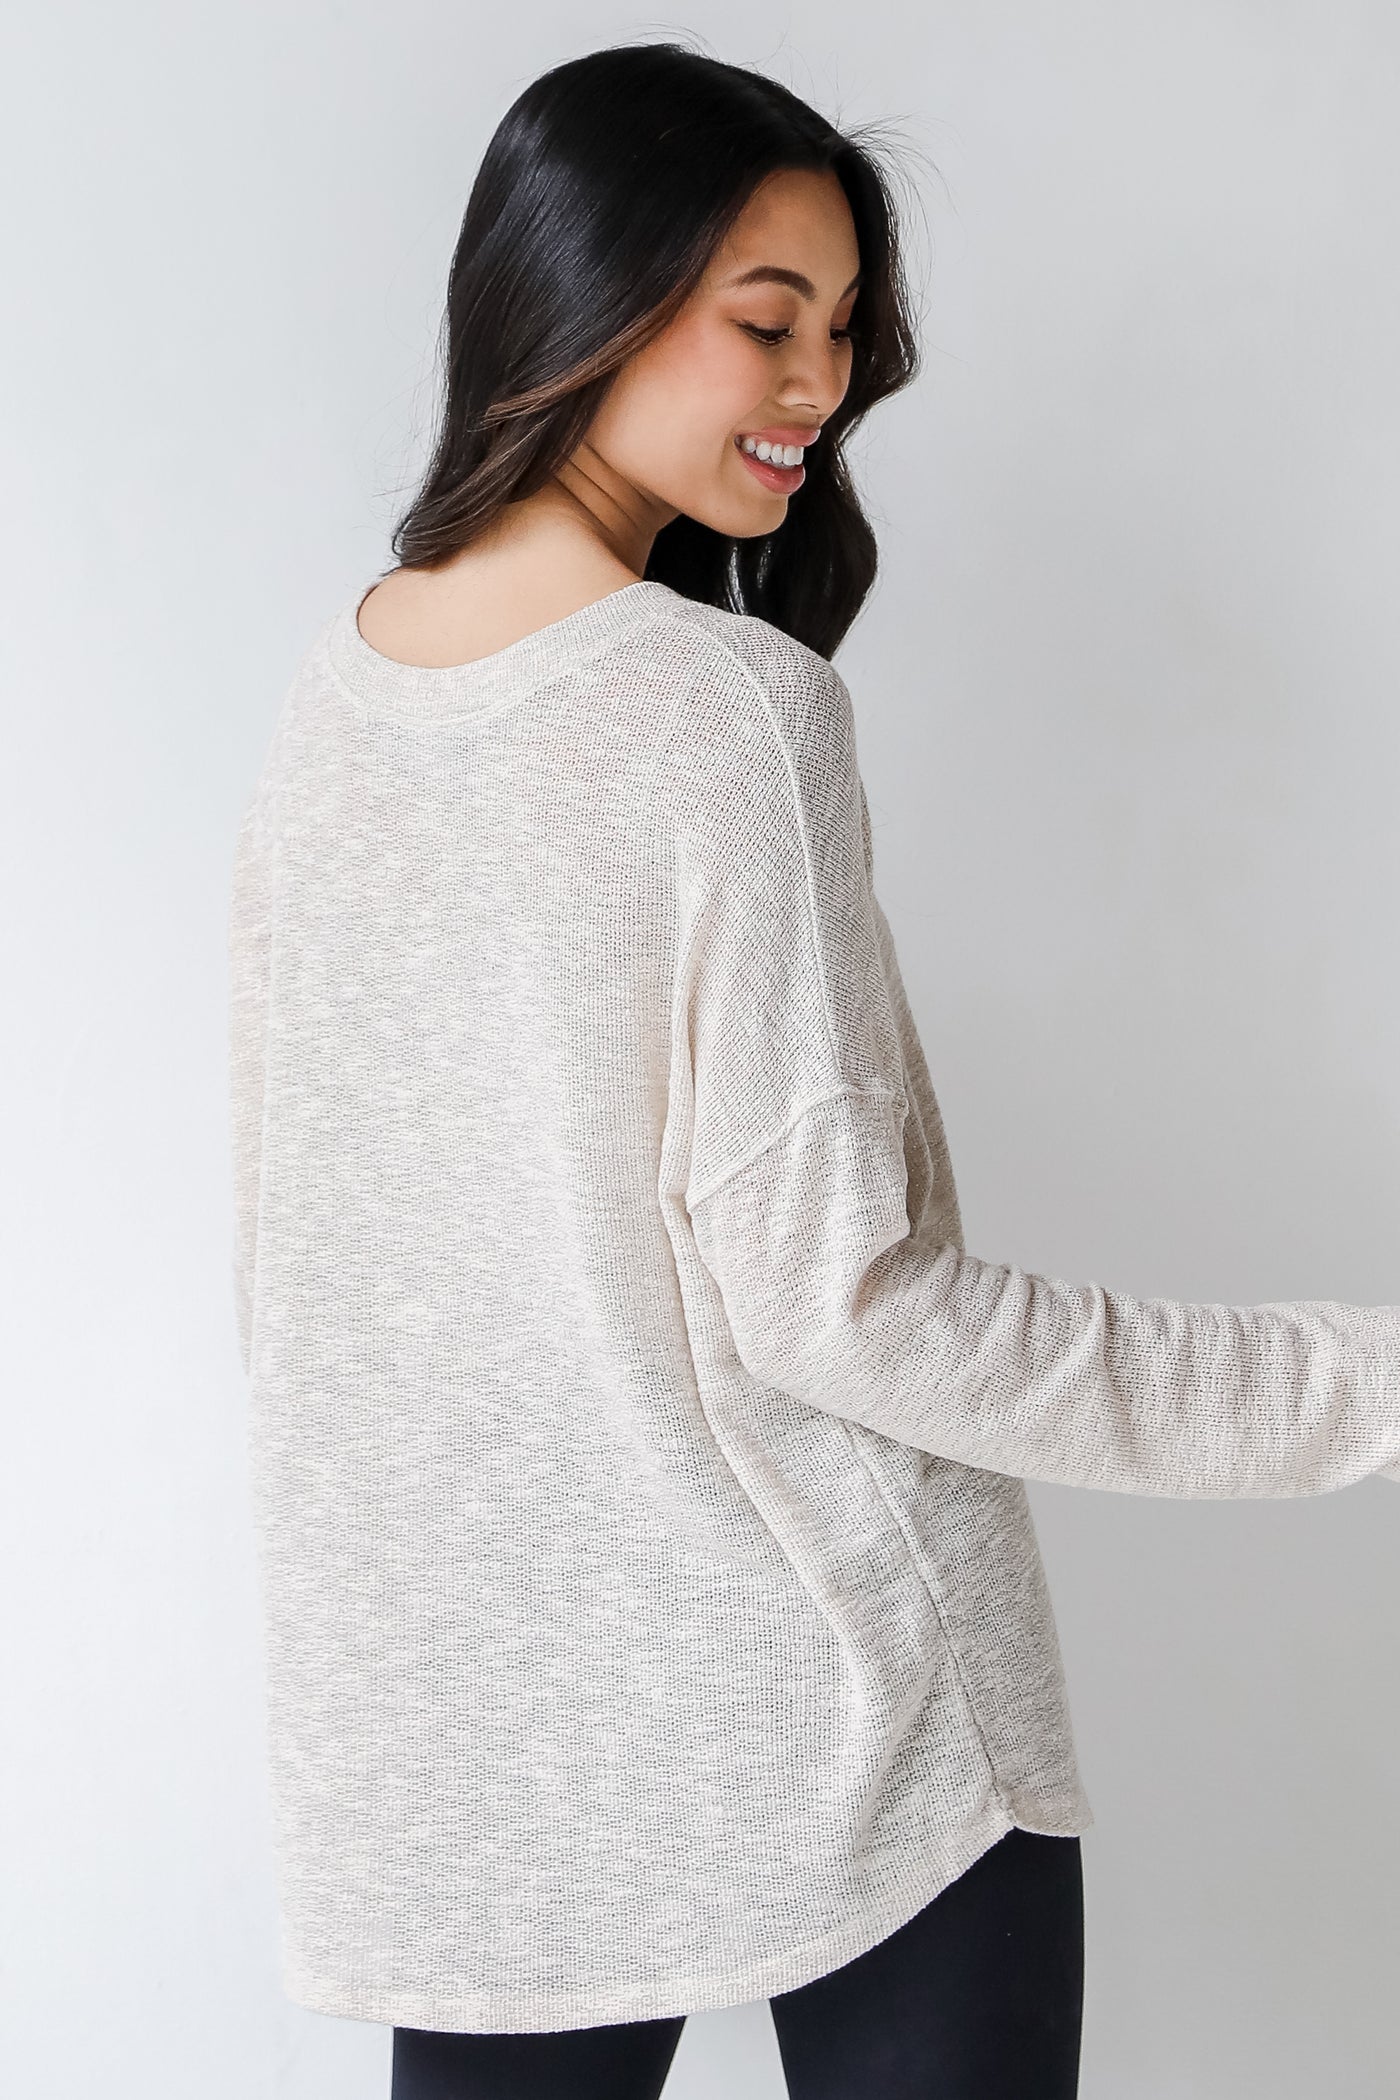 Knit Top in oatmeal back view